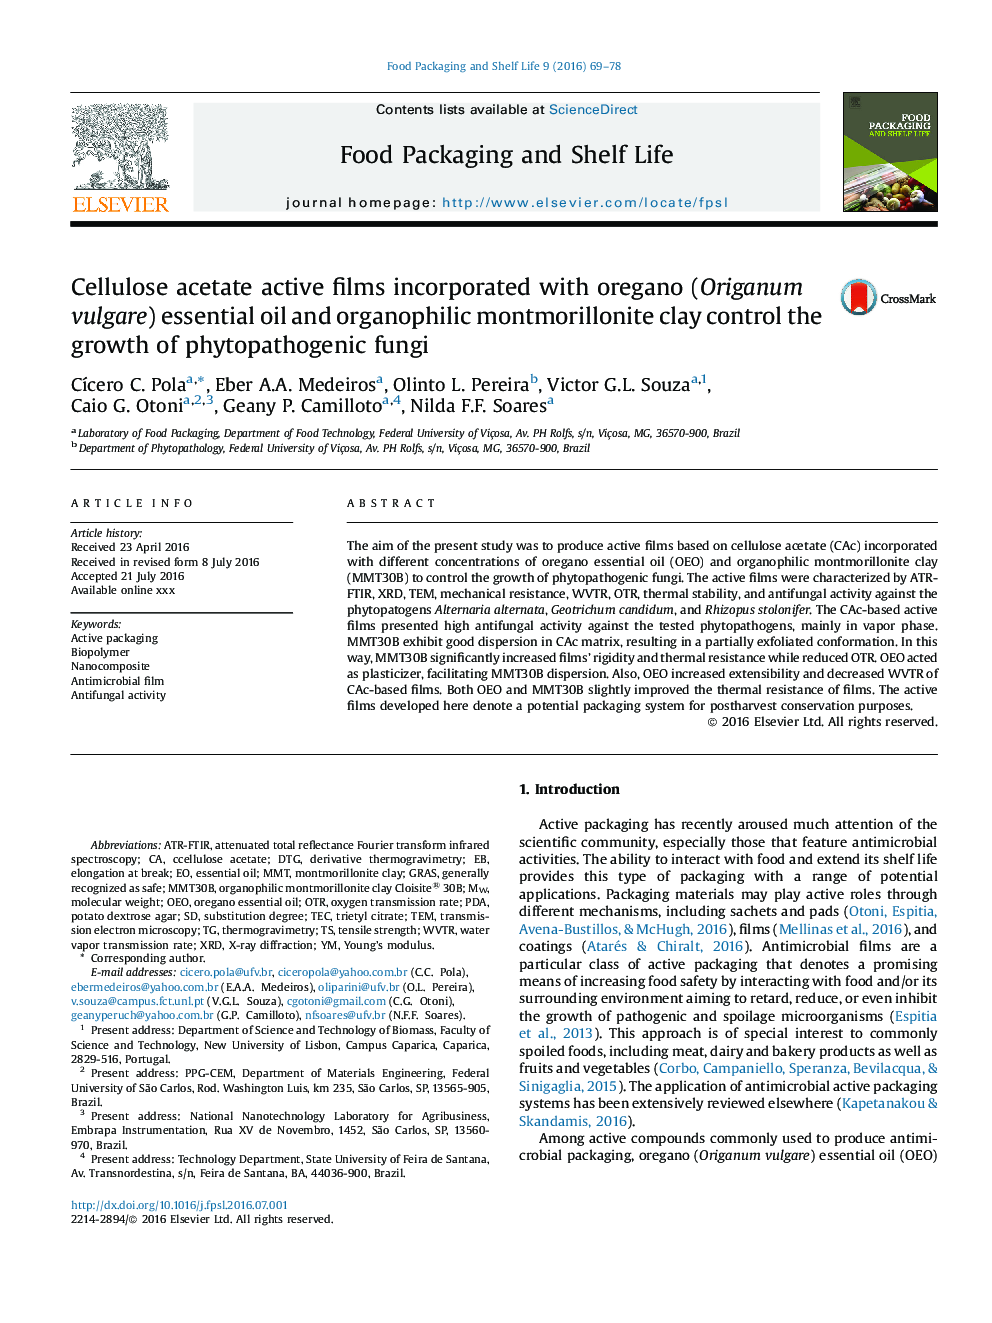 Cellulose acetate active films incorporated with oregano (Origanum vulgare) essential oil and organophilic montmorillonite clay control the growth of phytopathogenic fungi